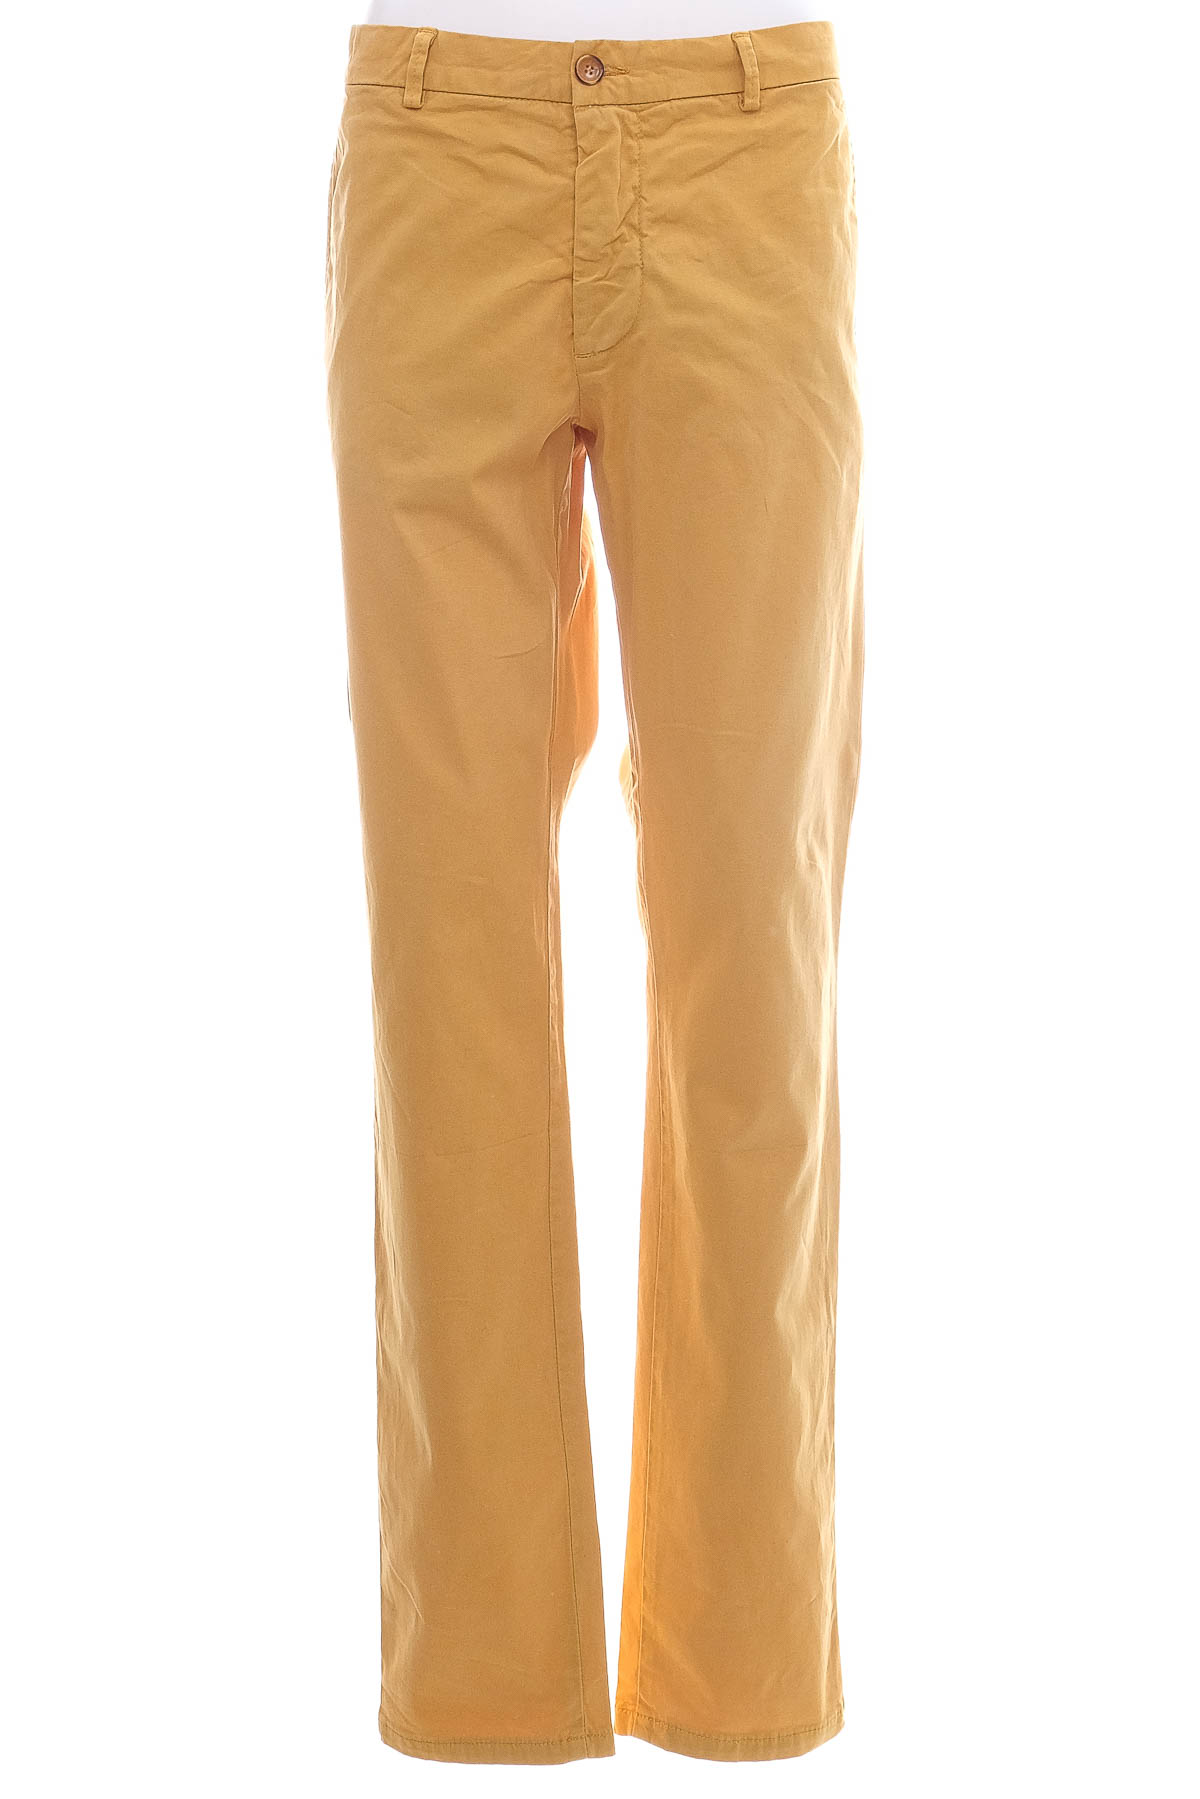 Men's trousers - United Colors of Benetton - 0